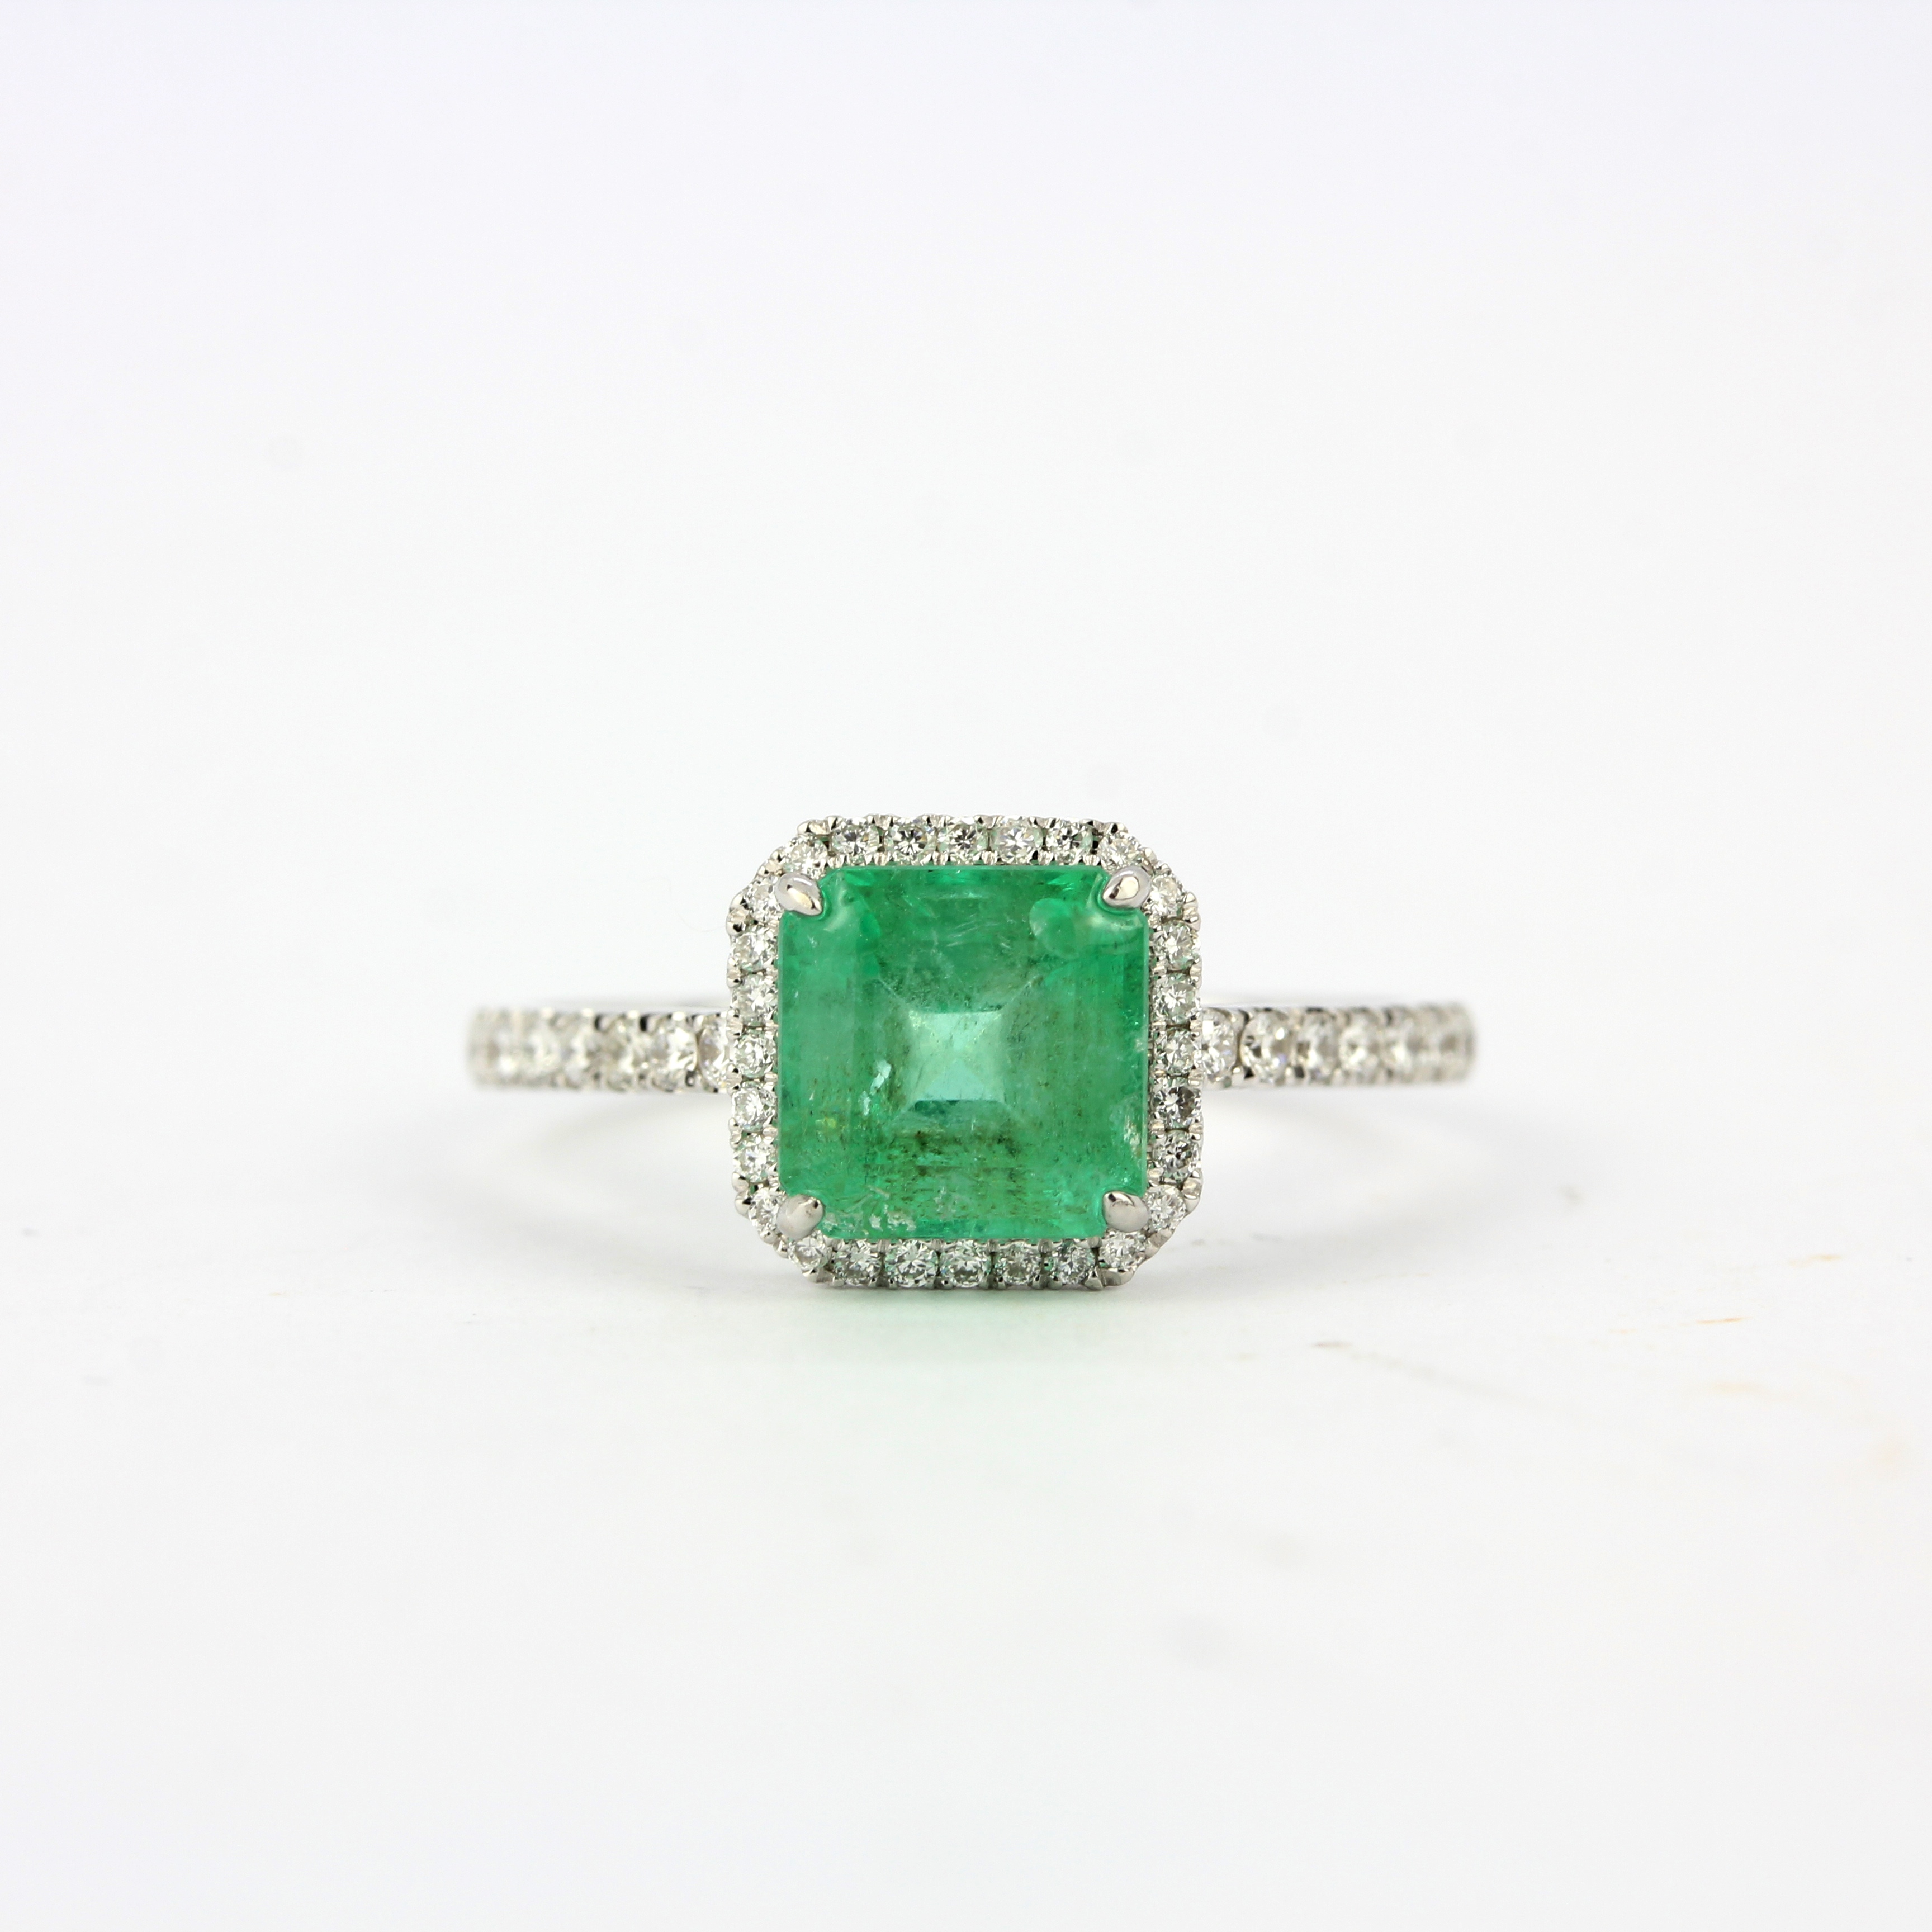 An 18ct white gold ring set with an emerald cut emerald and diamonds, ring size P.